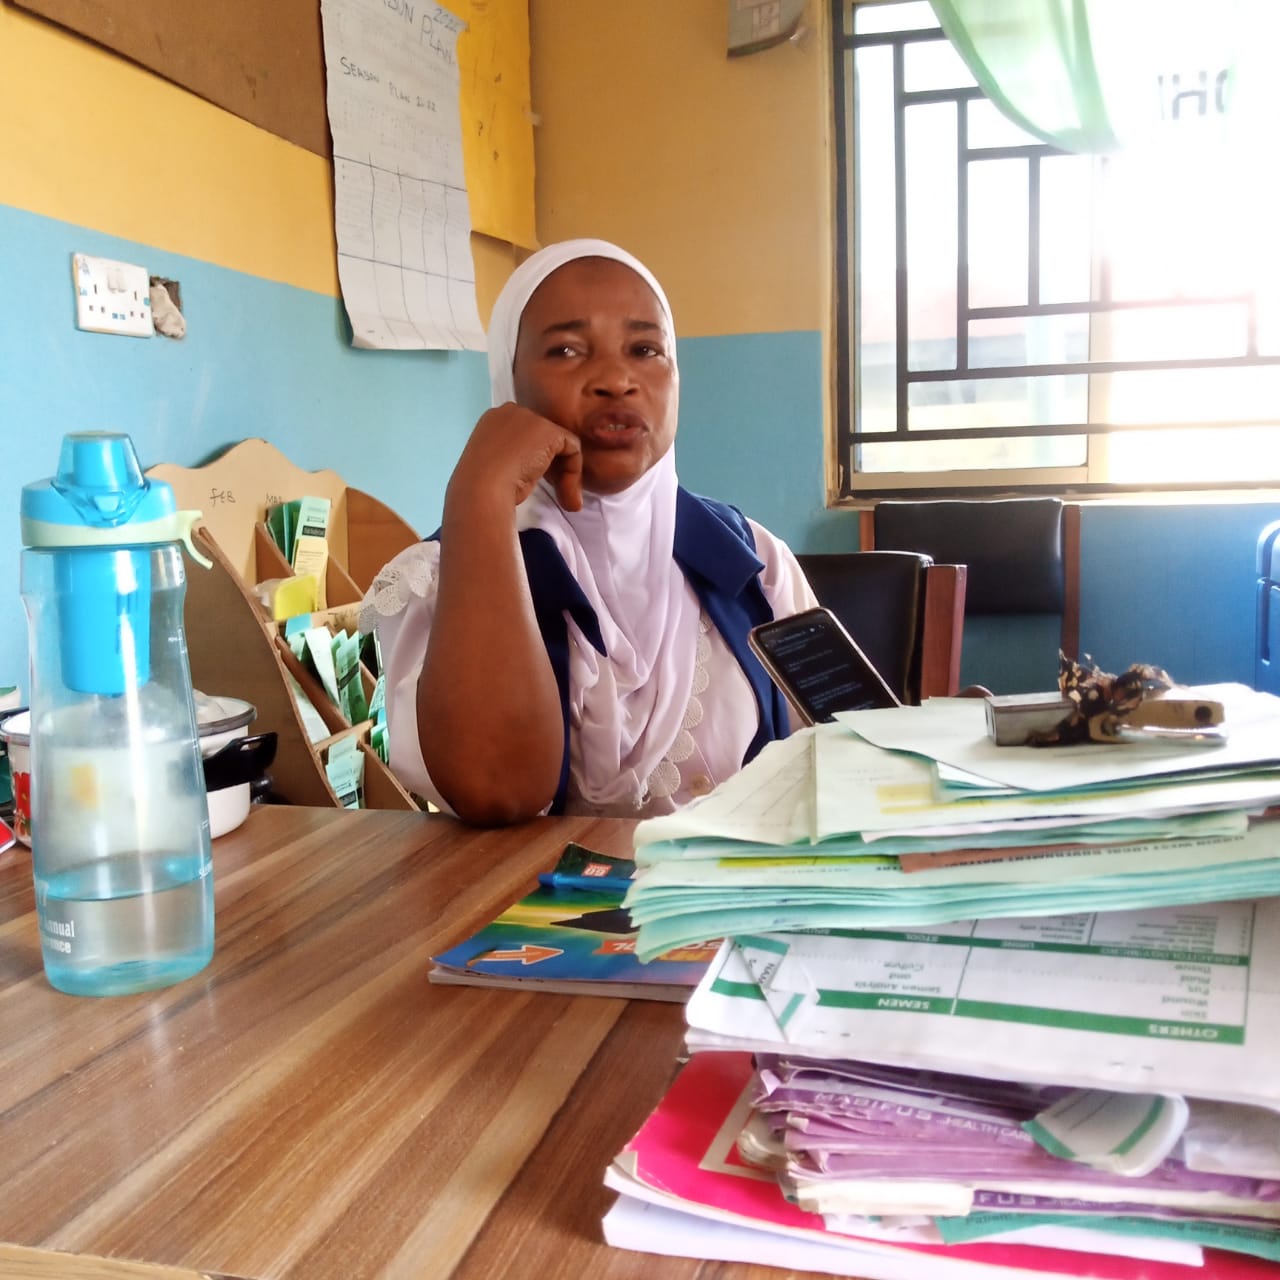 Fausat Umar, team lead, community outreach and health worker at at Idigba Primary Health Centre, Ilorin. Credit: Afeez Bolaji